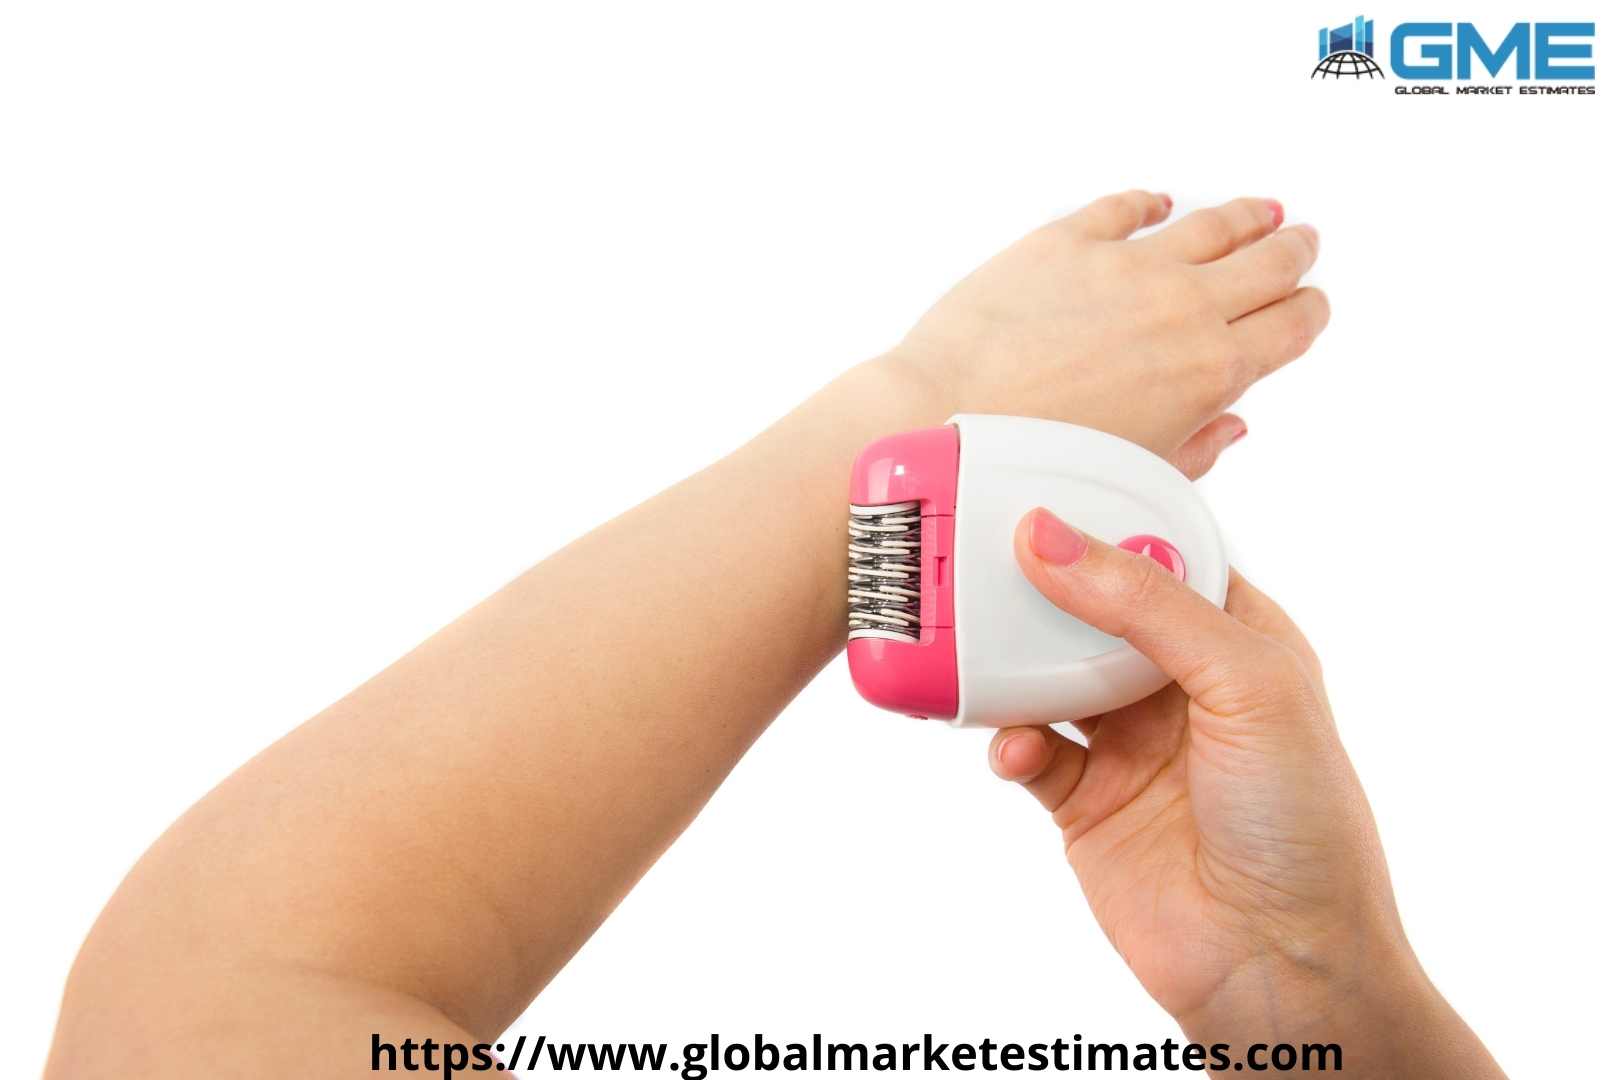 Which companies offer home-based hair removal treatment devices? What could be the possible chances of this market to grow?